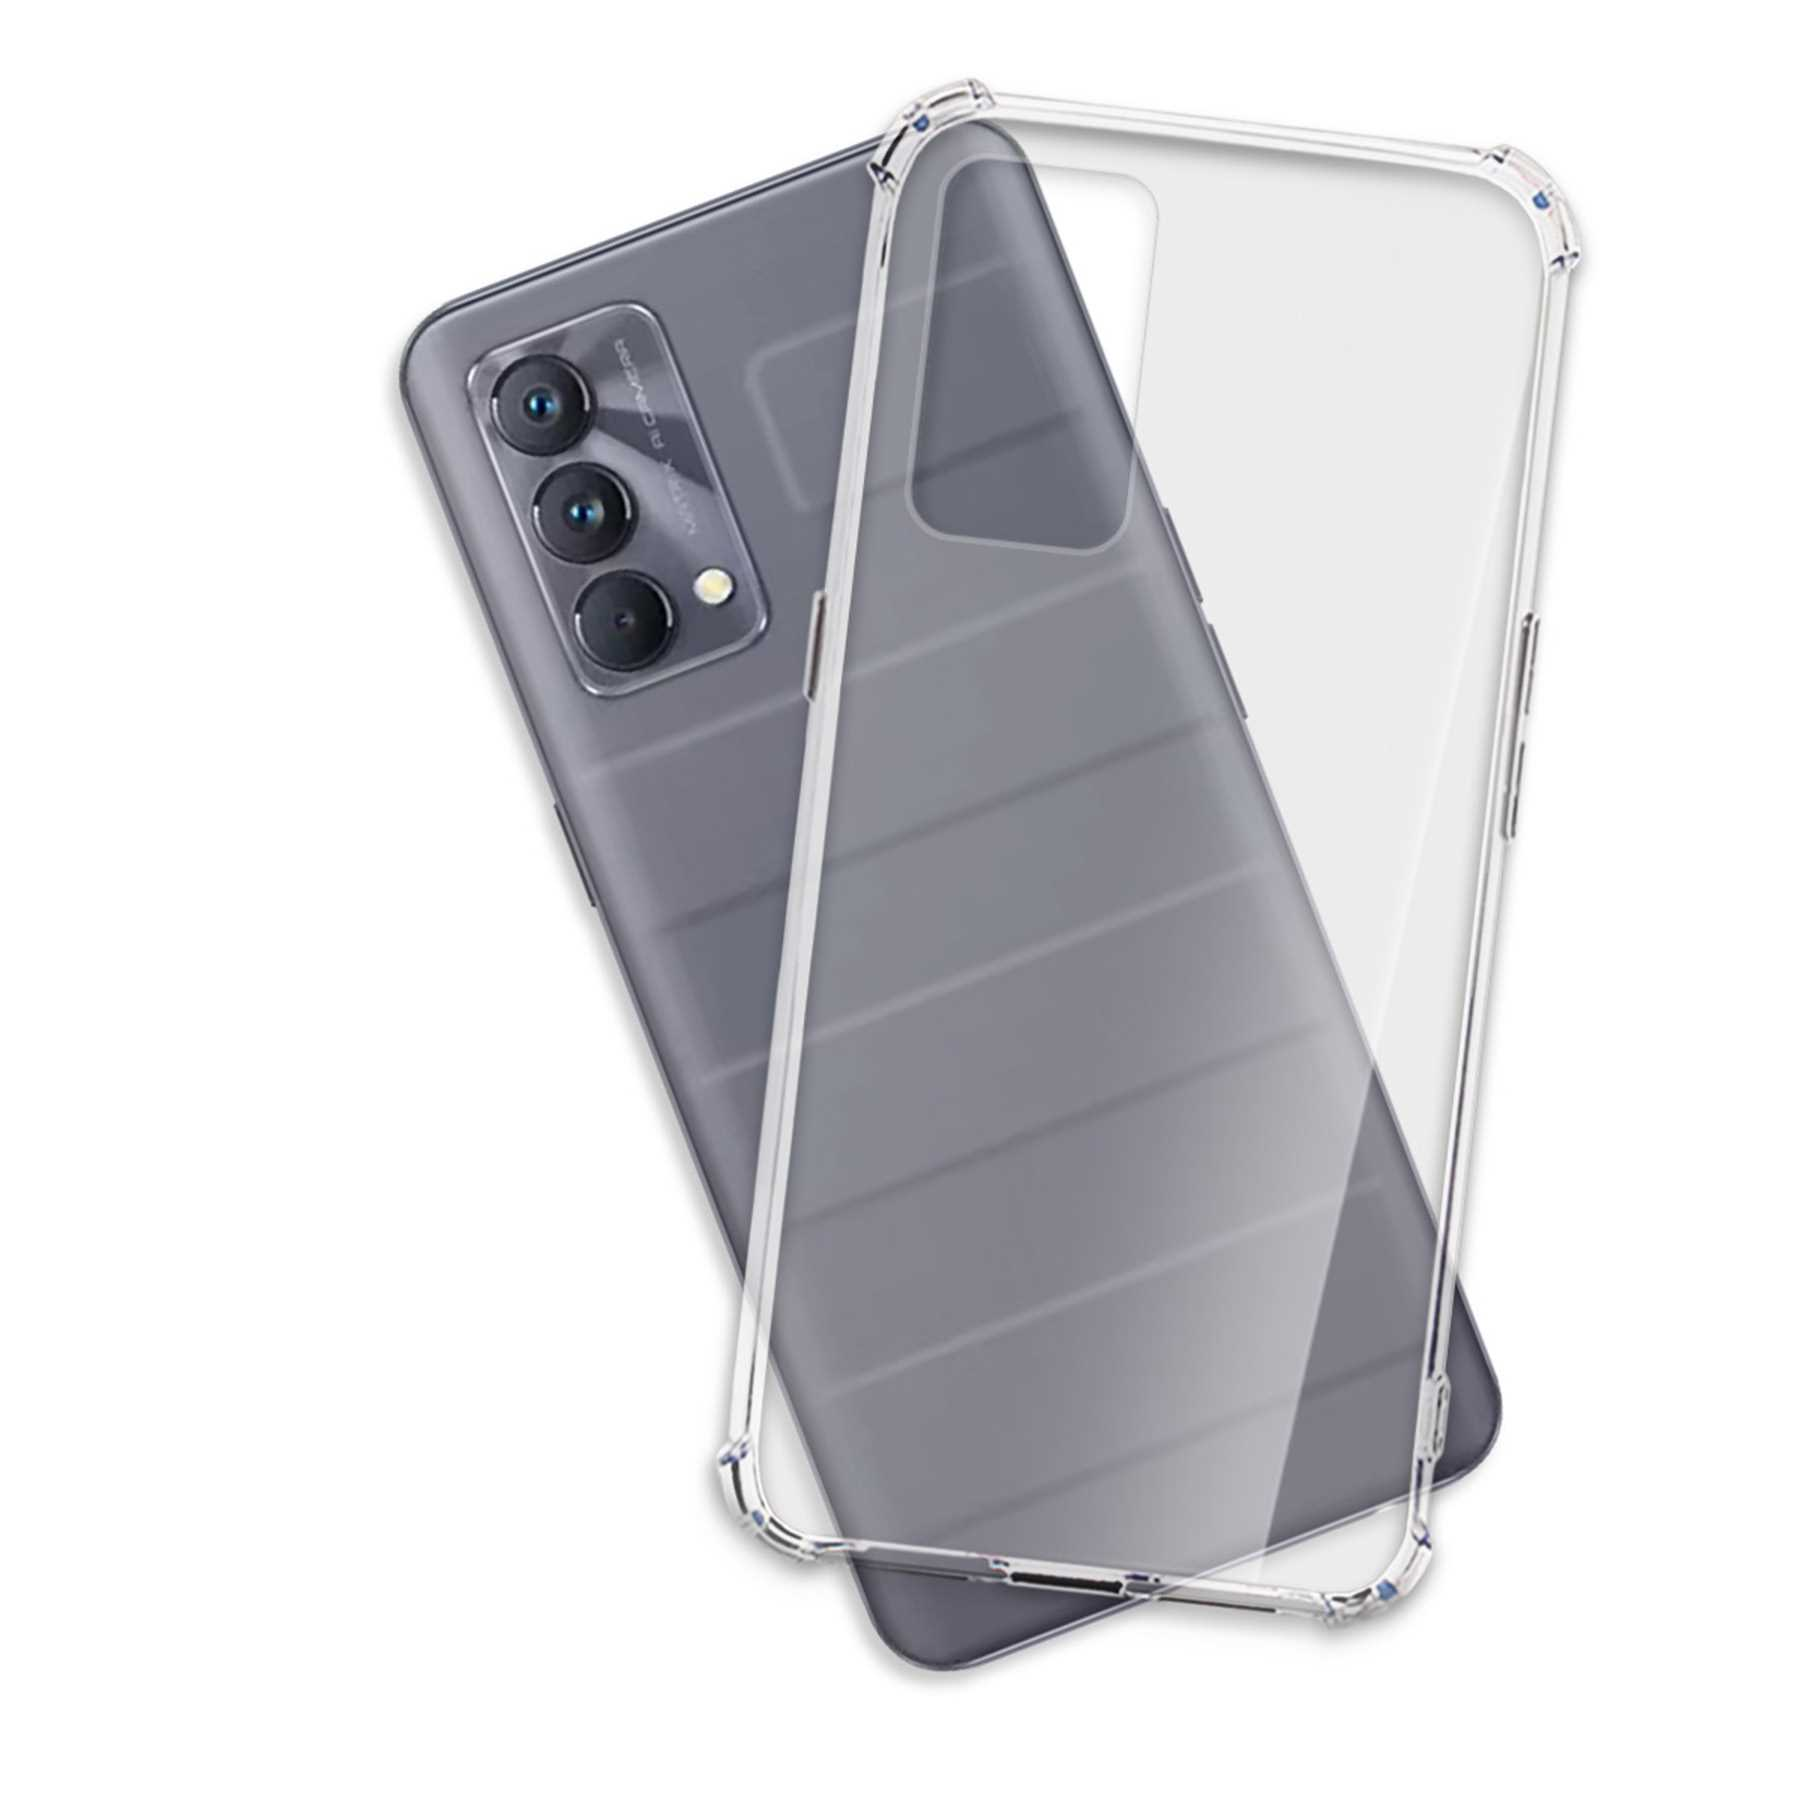 MTB MORE ENERGY 5G, Edition Case, Clear Armor Master GT Transparent Backcover, Realme